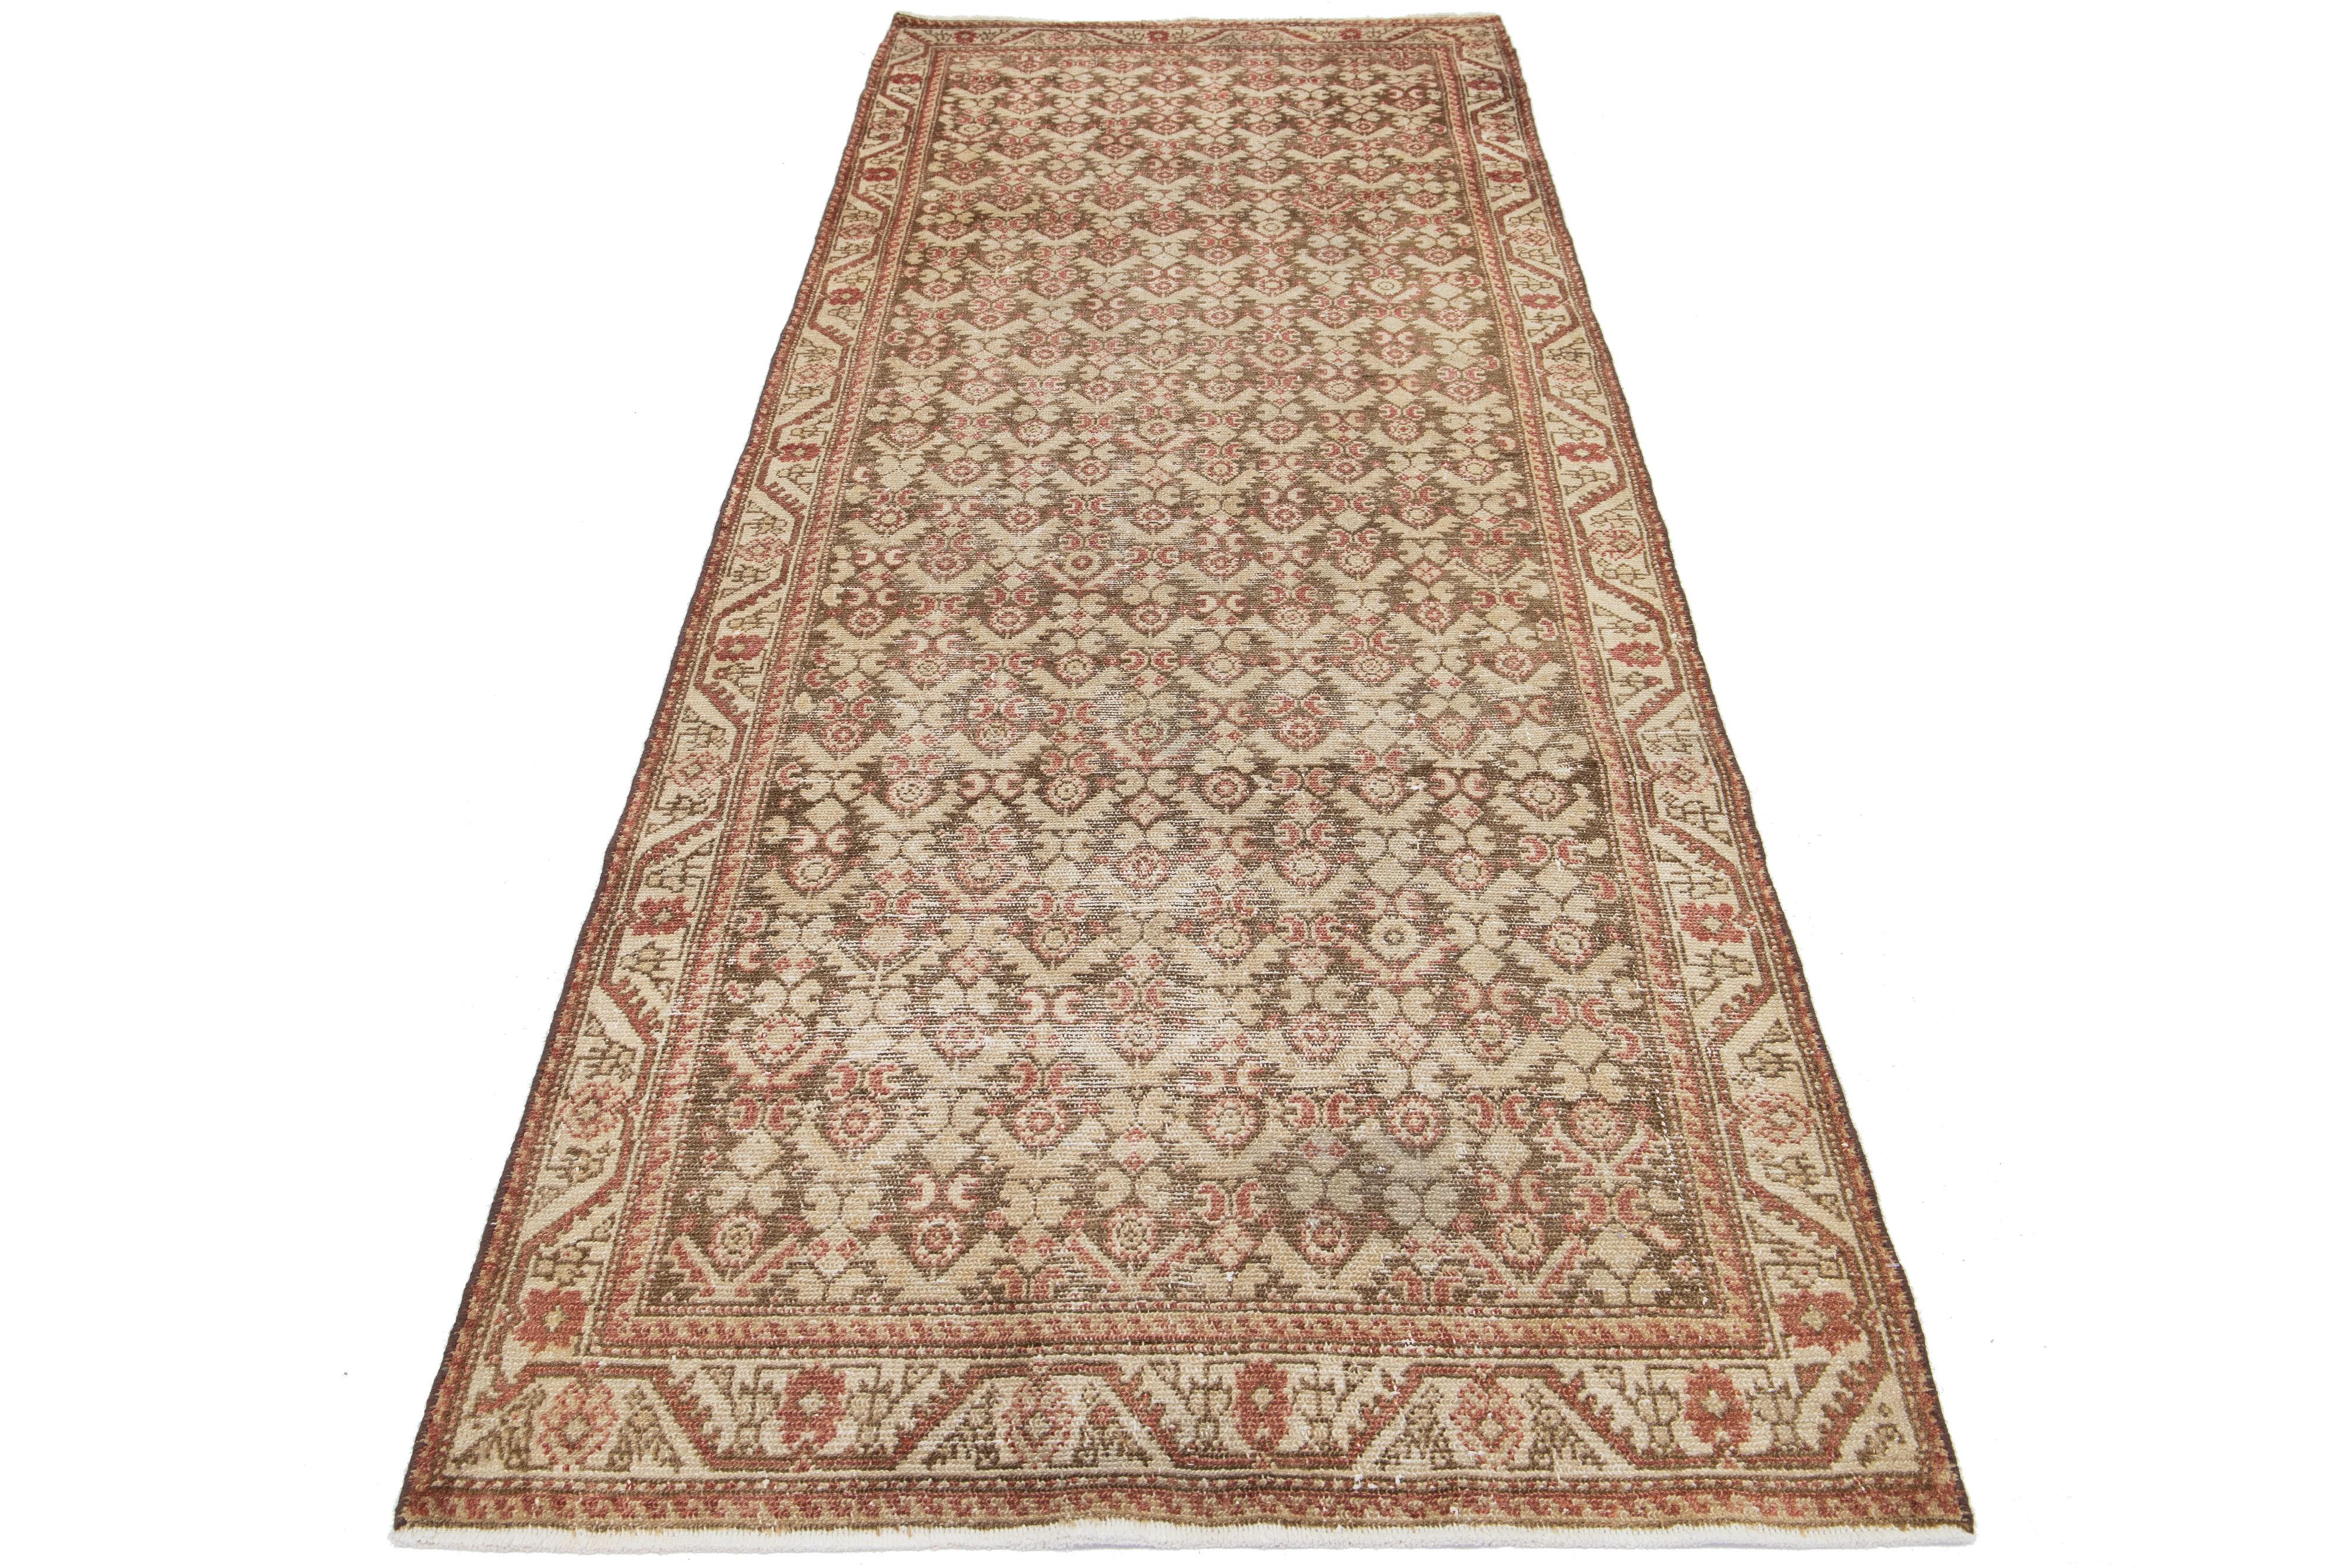 An antique Persian Malayer wool rug with a rust and beige all-over pattern on a brown field.

This rug measures 3'5' x 9'3